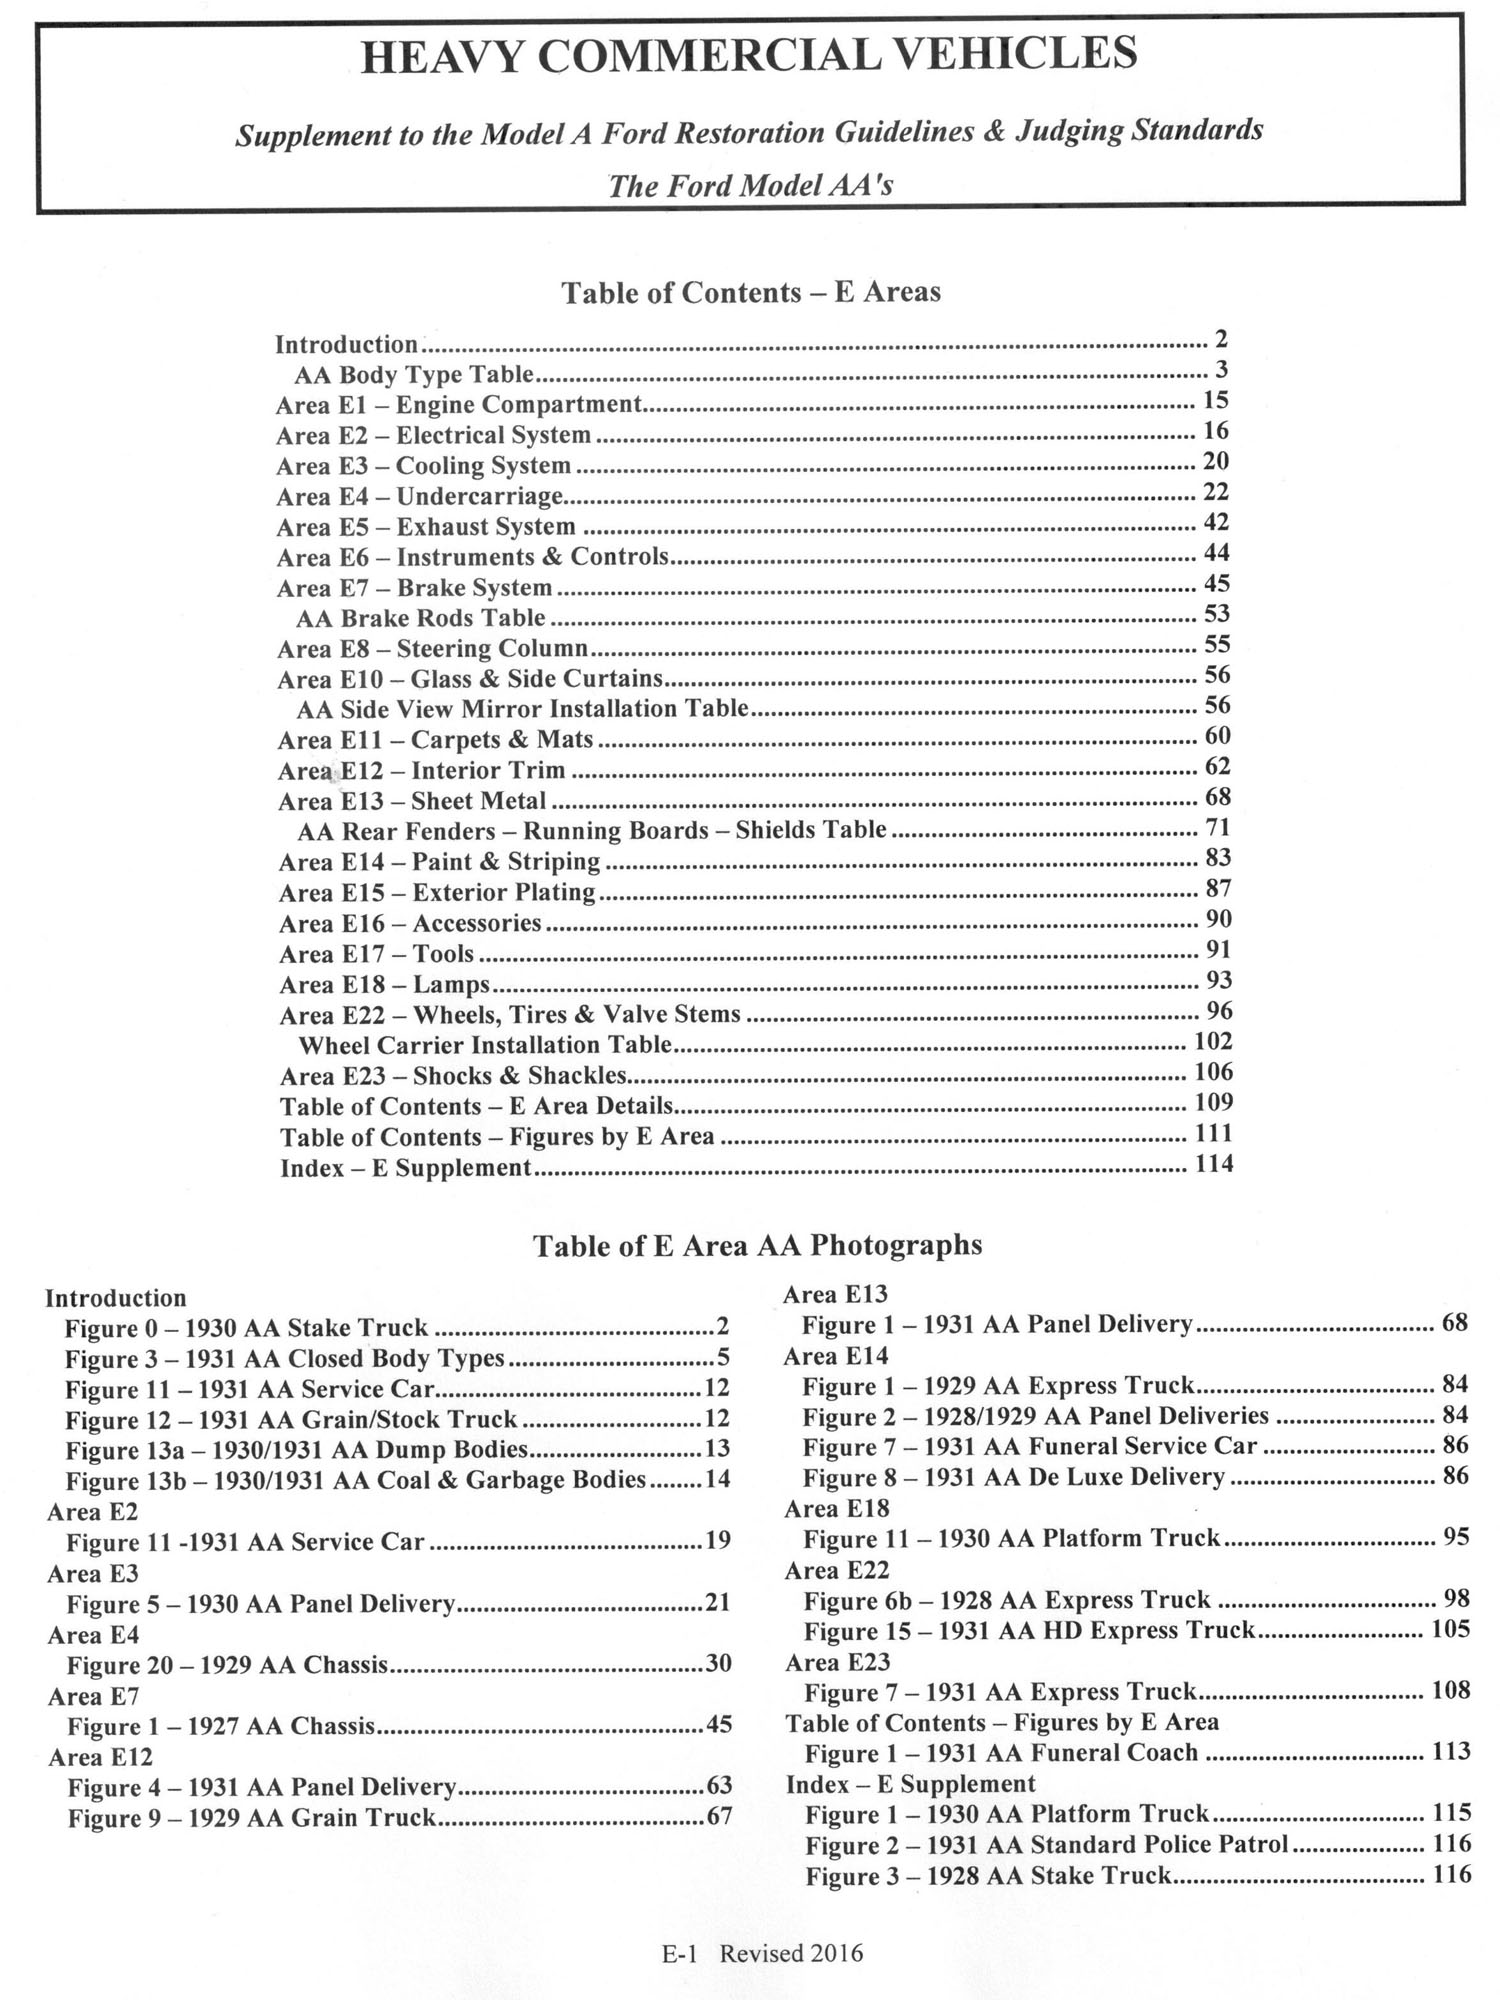 E 16.02.05 Supplement - page 1.jpg